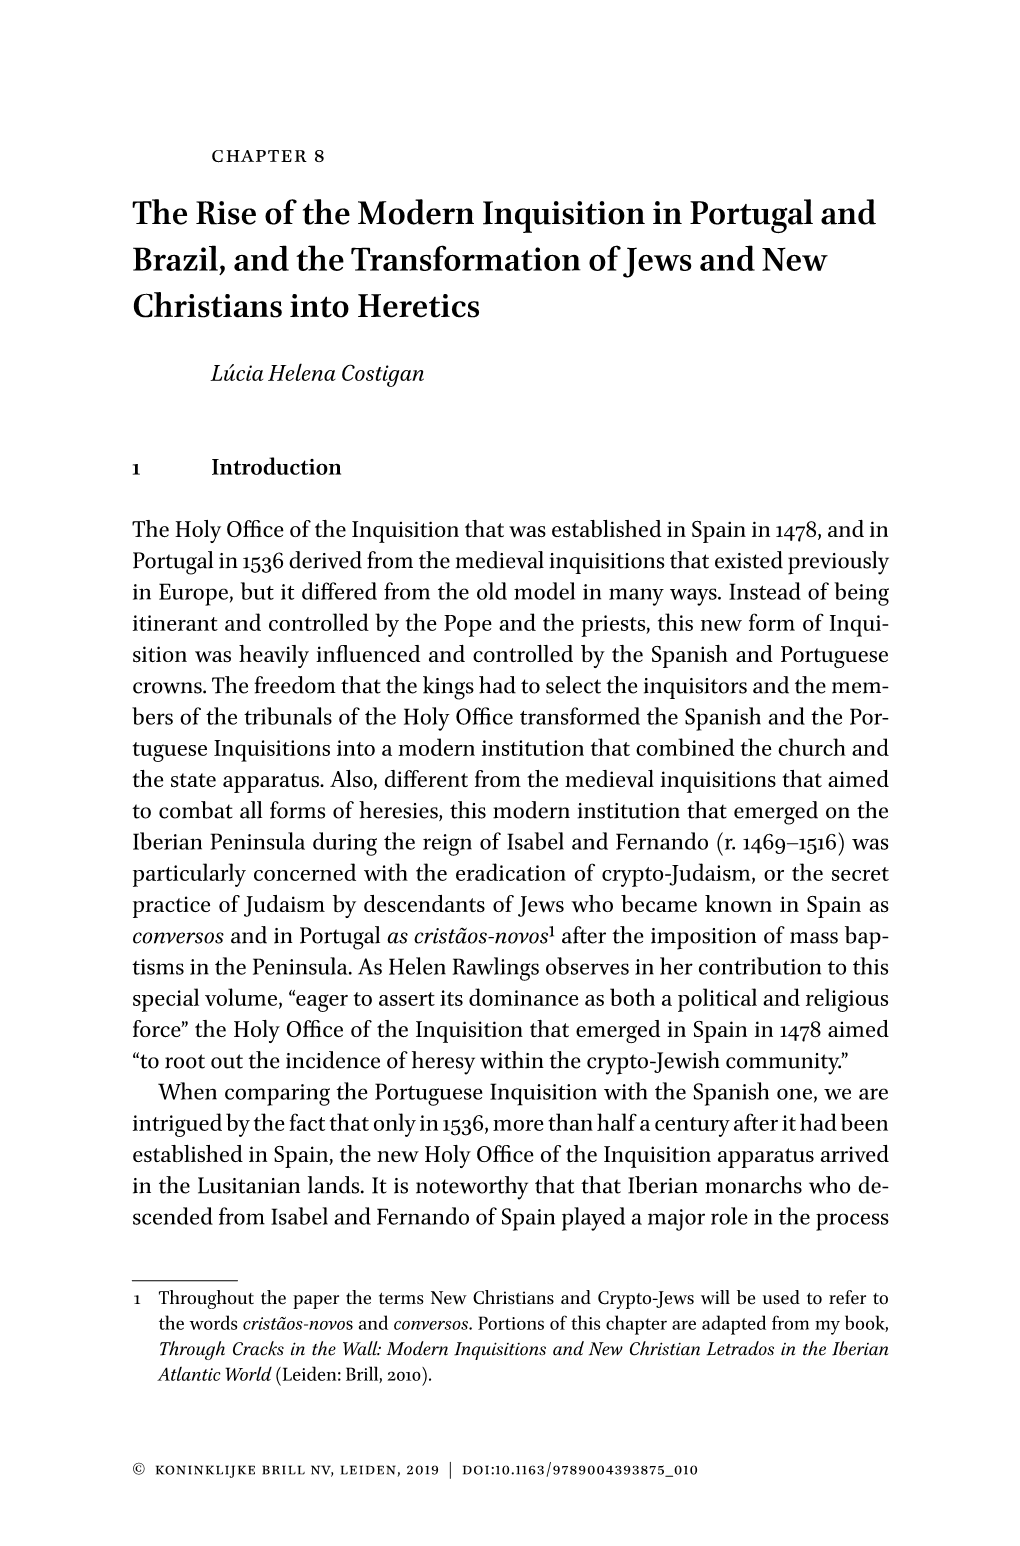 The Rise of the Modern Inquisition in Portugal and Brazil, and the Transformation of Jews and New Christians Into Heretics